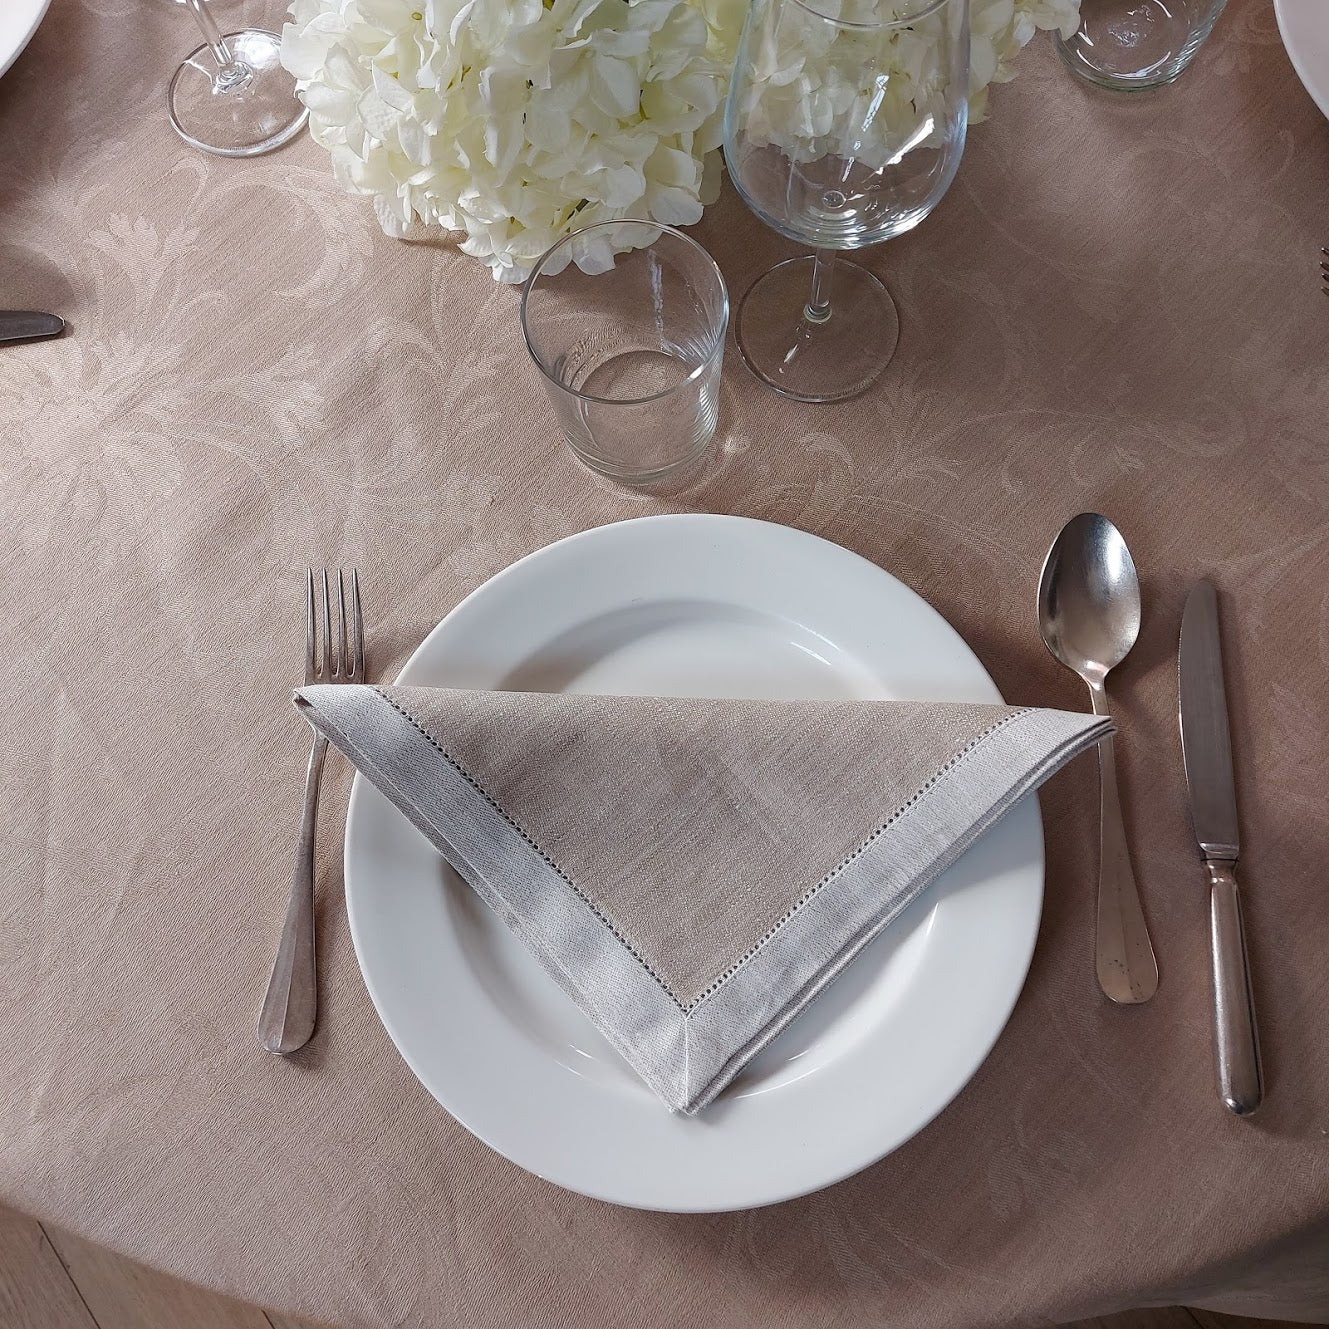 Ortensia jacquard linen tablelcoth with napkin